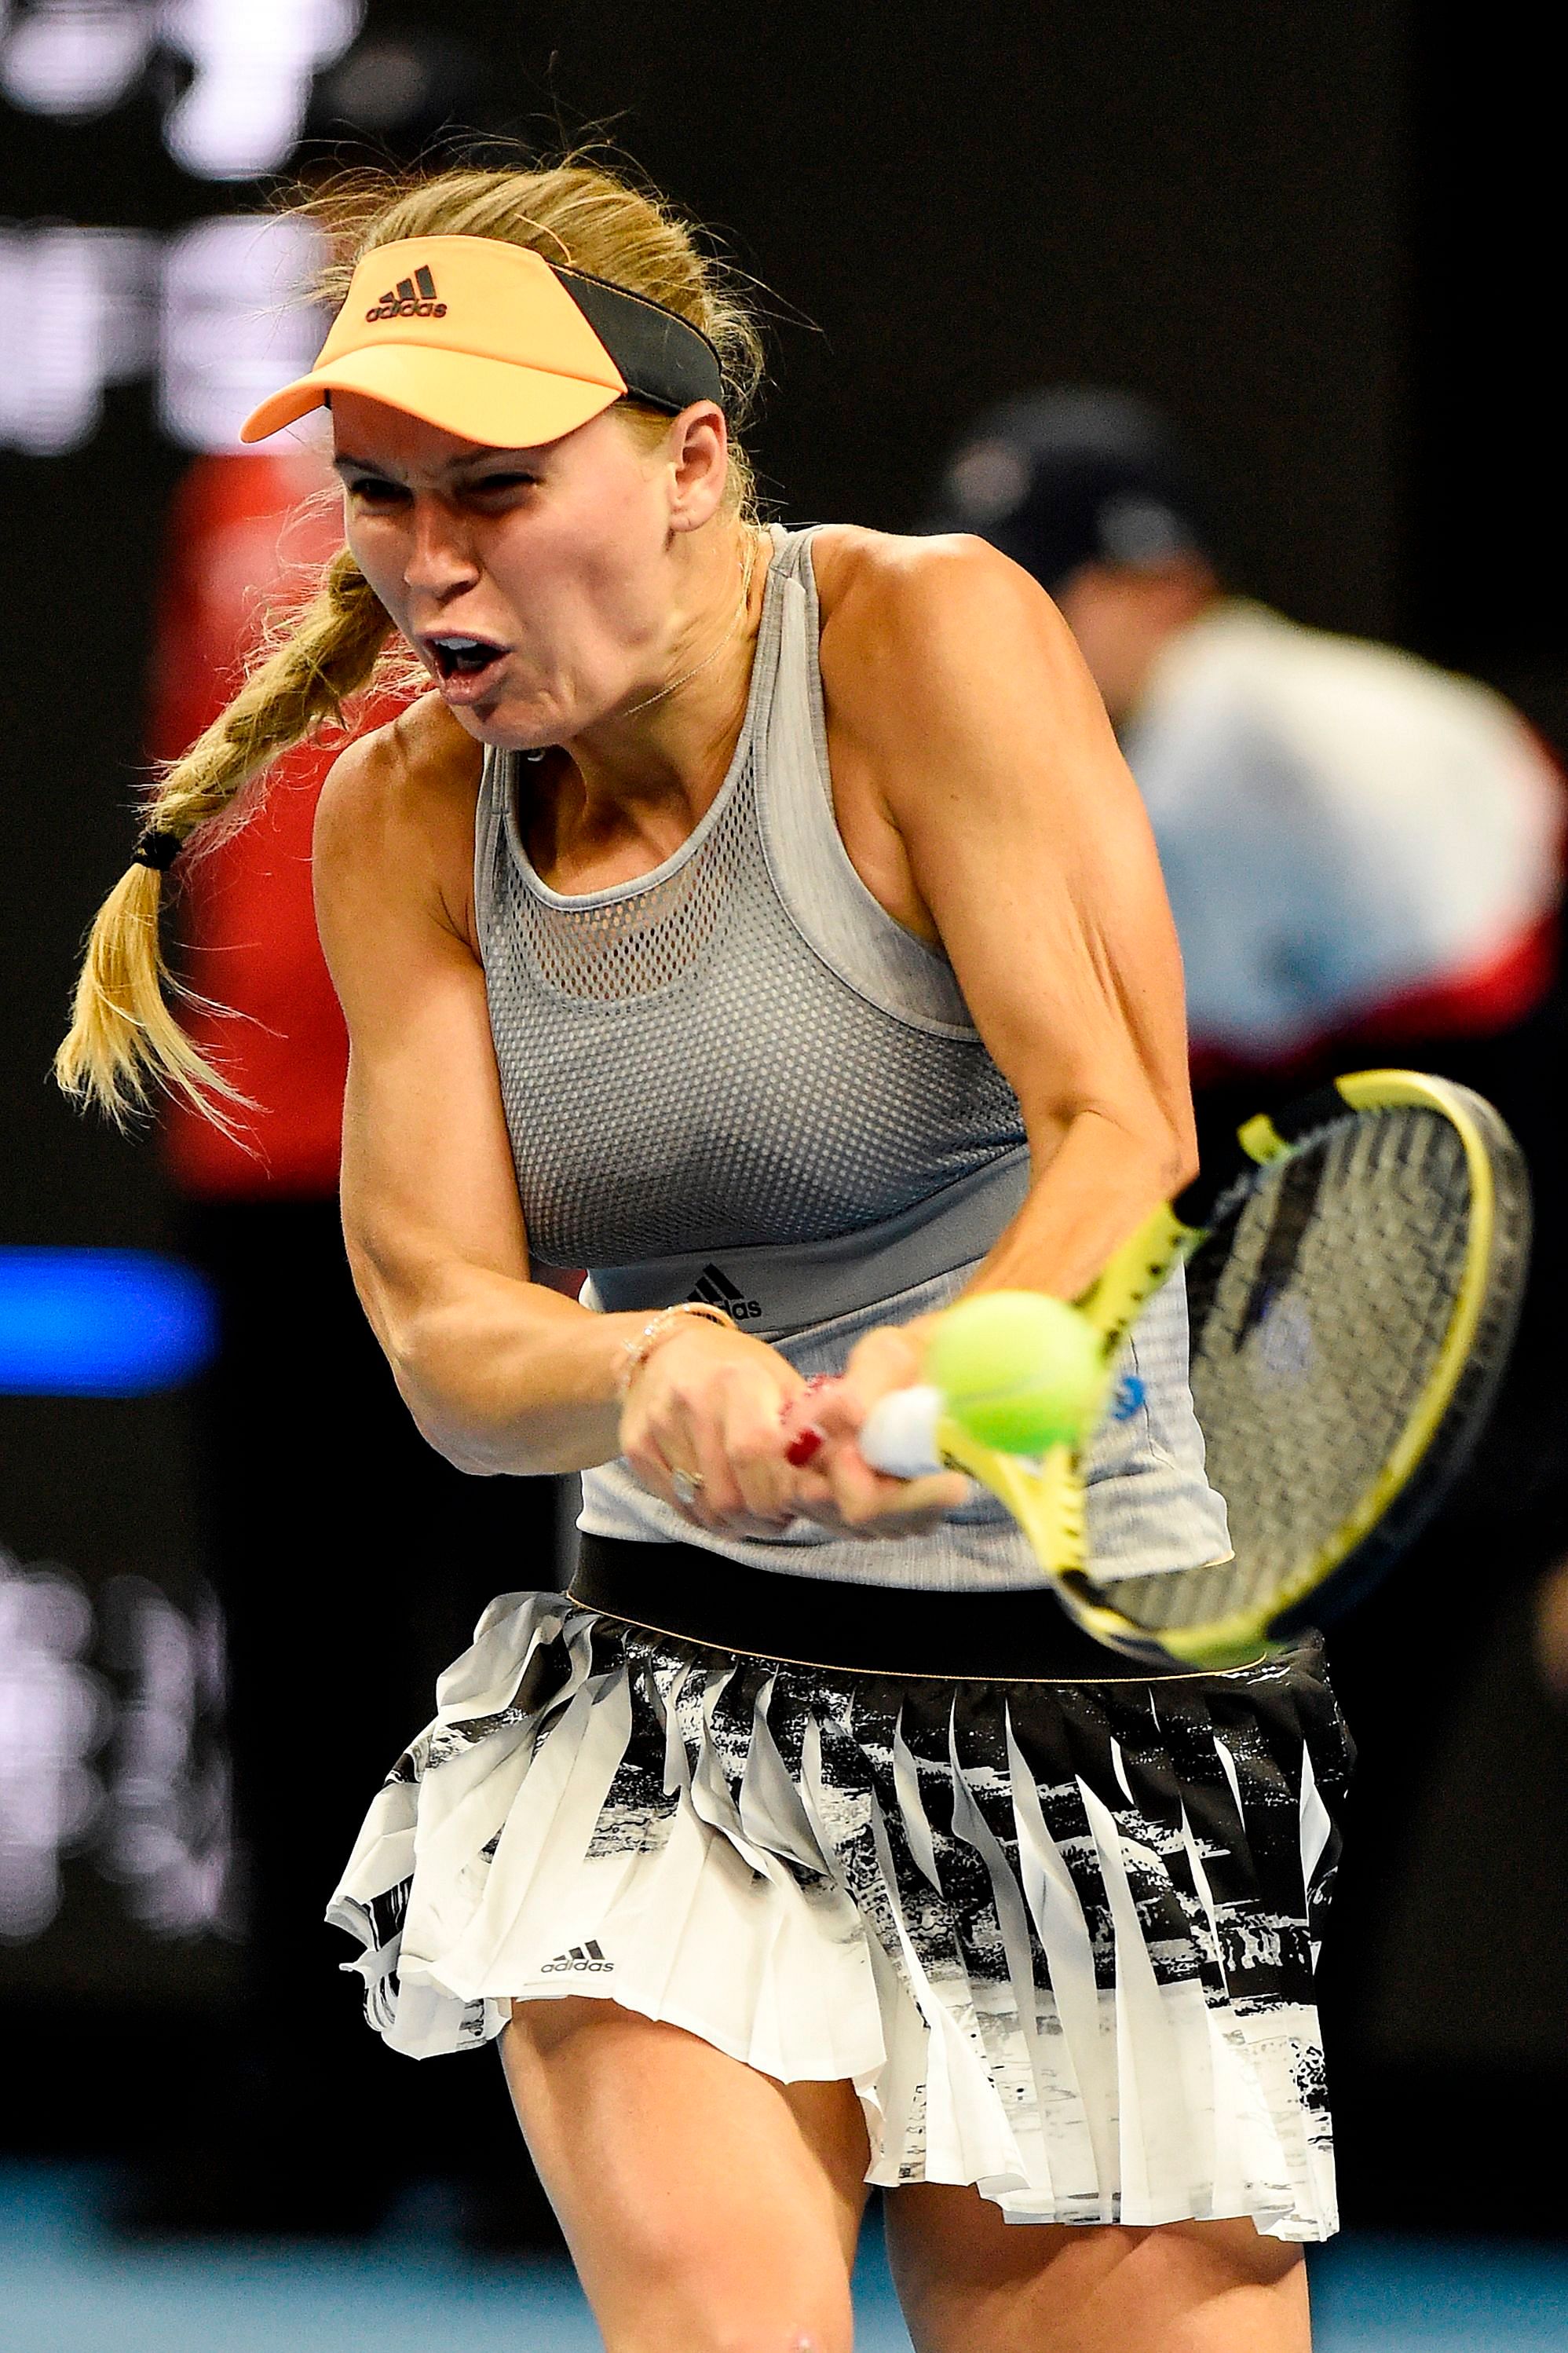 This file photo taken on October 5, 2019 shows Caroline Wozniacki of Denmark hiting a return during her women's singles semi-final match against Naomi Osaka of Japan at the China Open tennis tournament in Beijing. - Caroline Wozniacki will retire from tennis after Australian Open announced the player on December 6, 2019. (Photo by AFP)